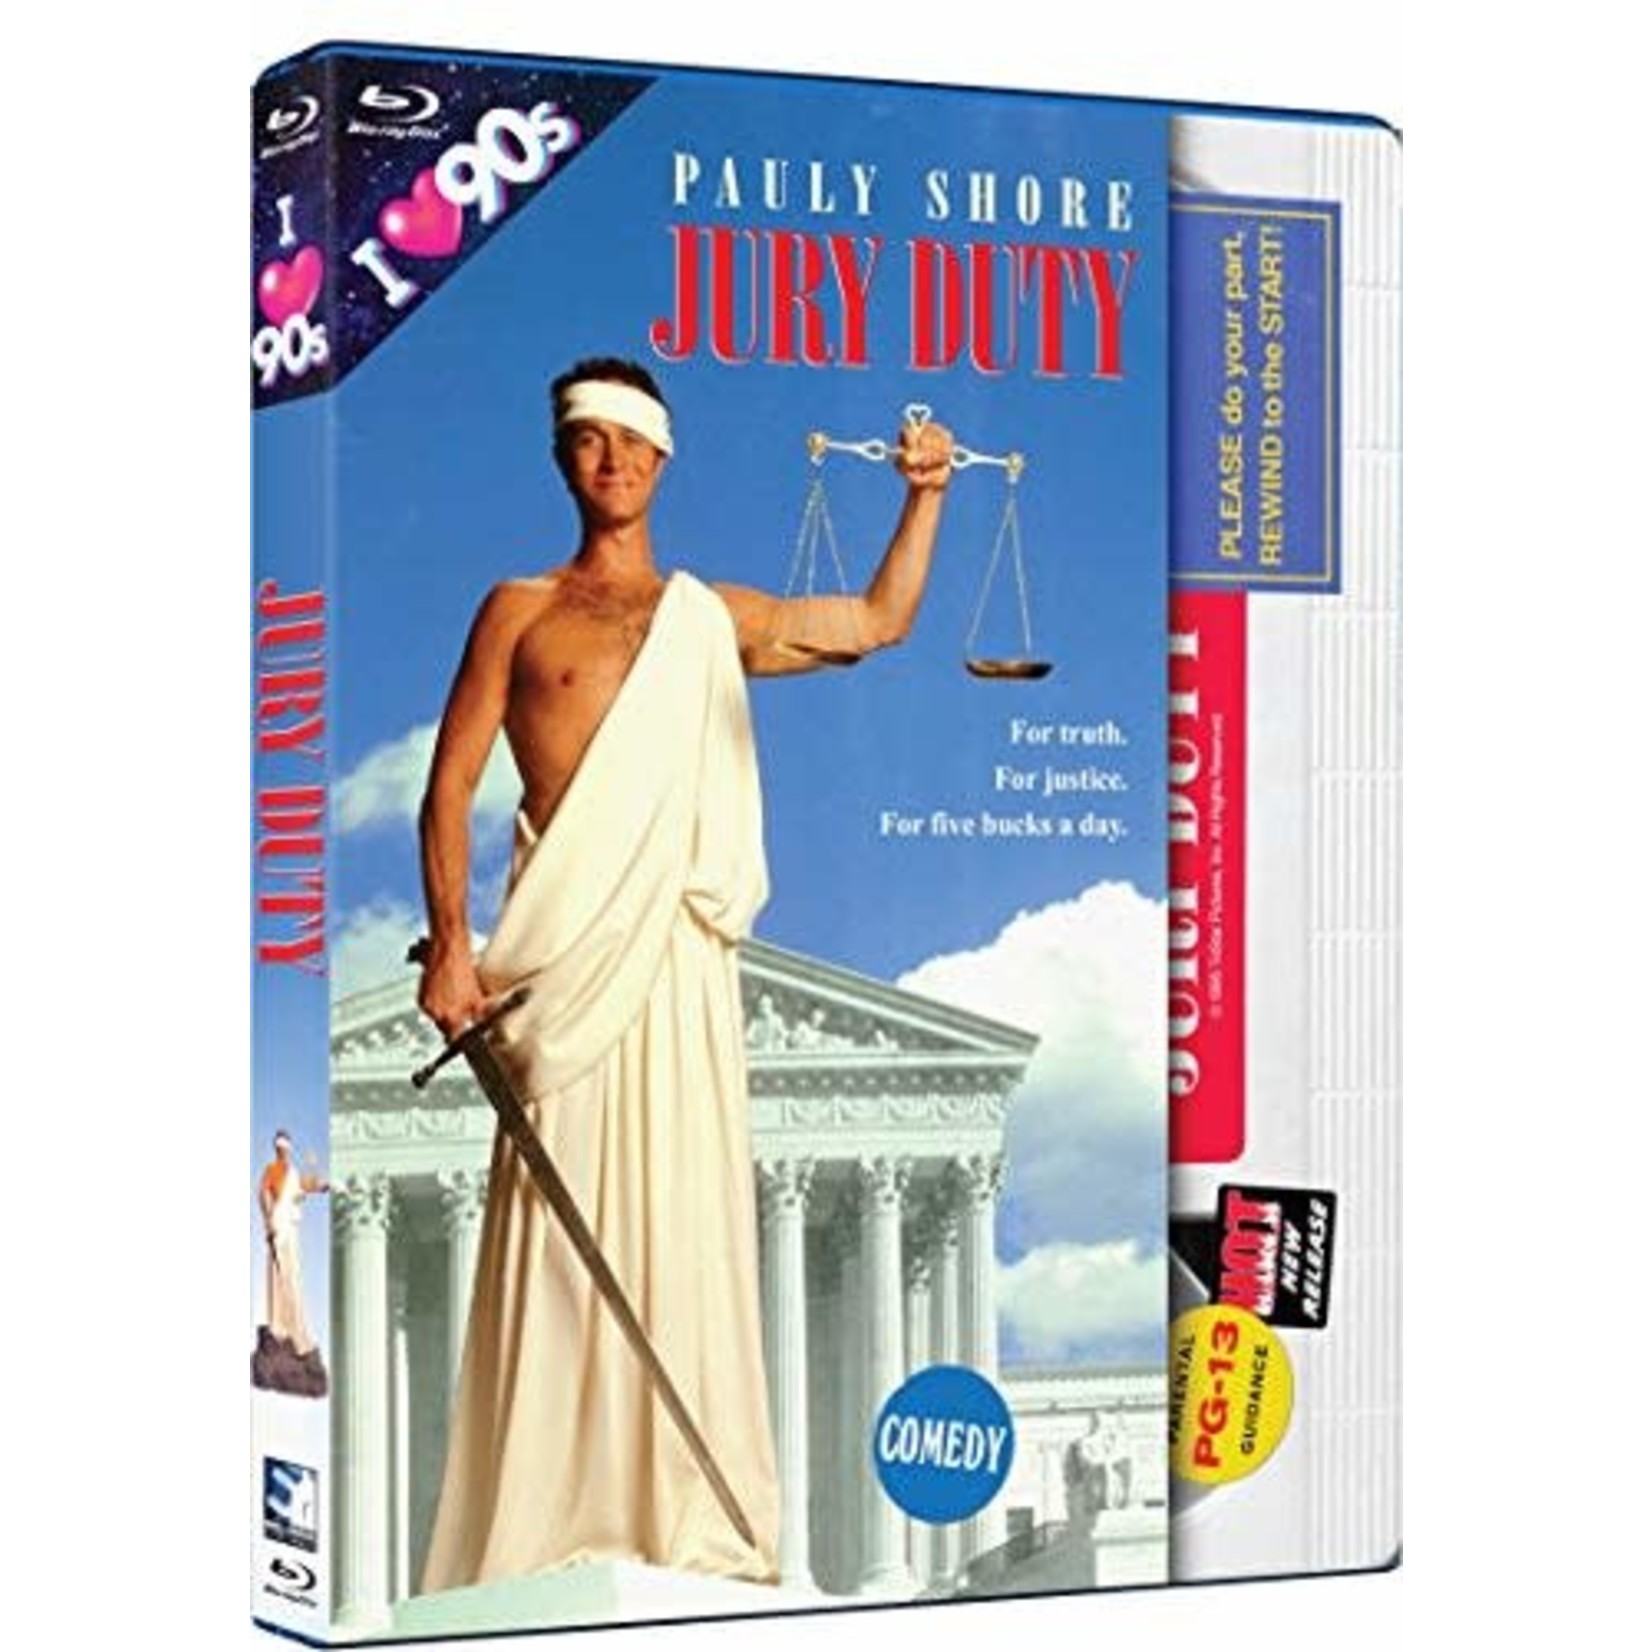 Jury Duty 1995 Retro Vhs Packaging Brd The Odds And Sods Shoppe